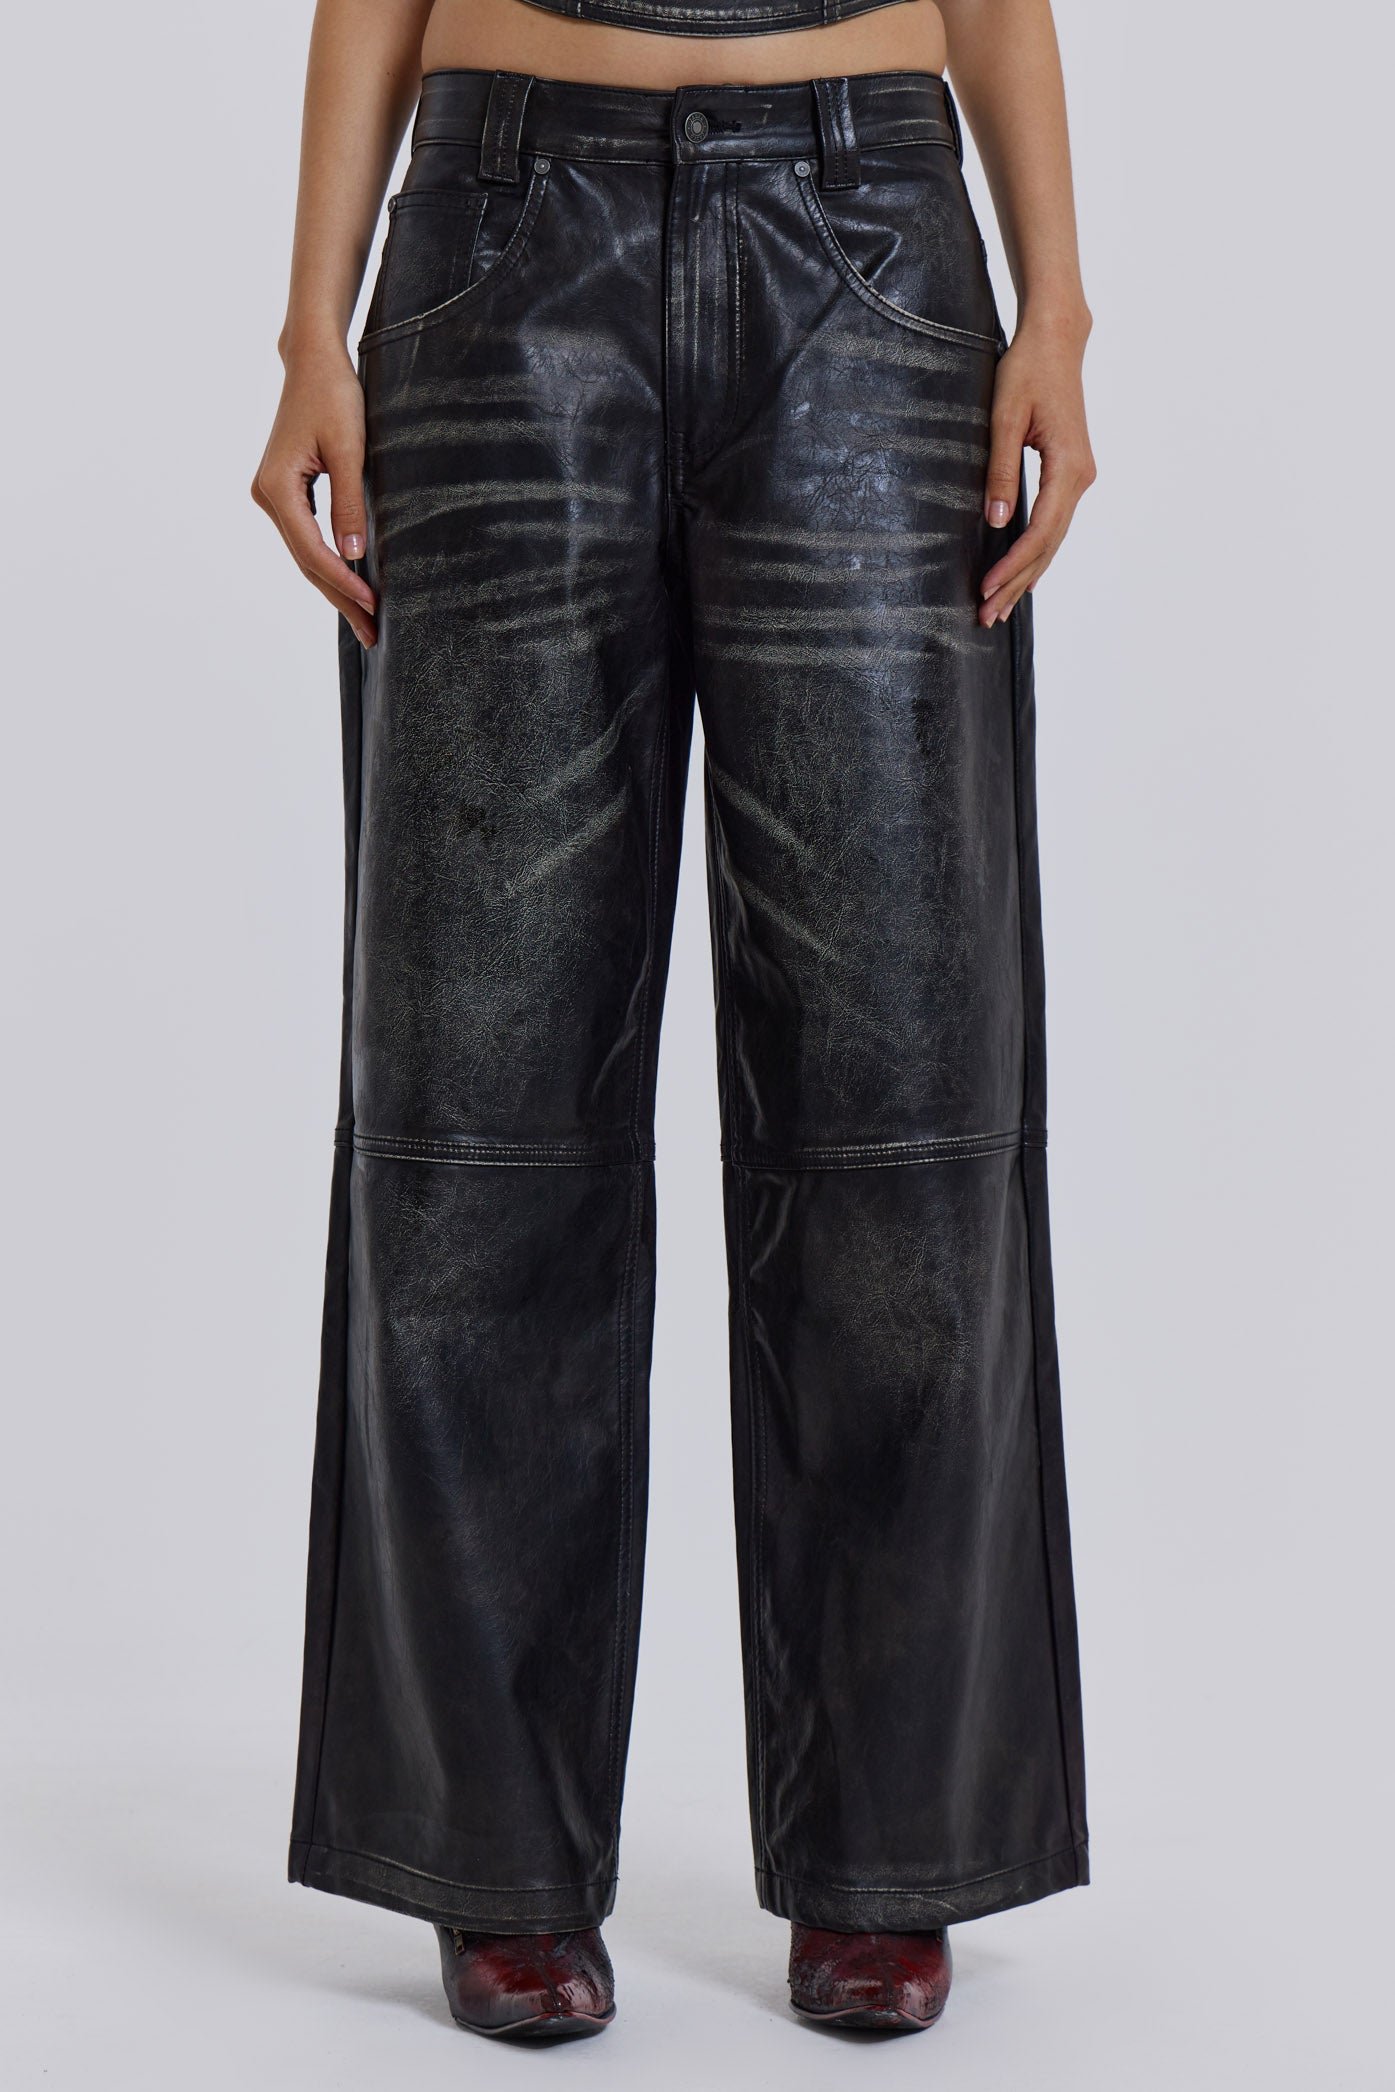 Ash Faux Leather Colossus Trousers